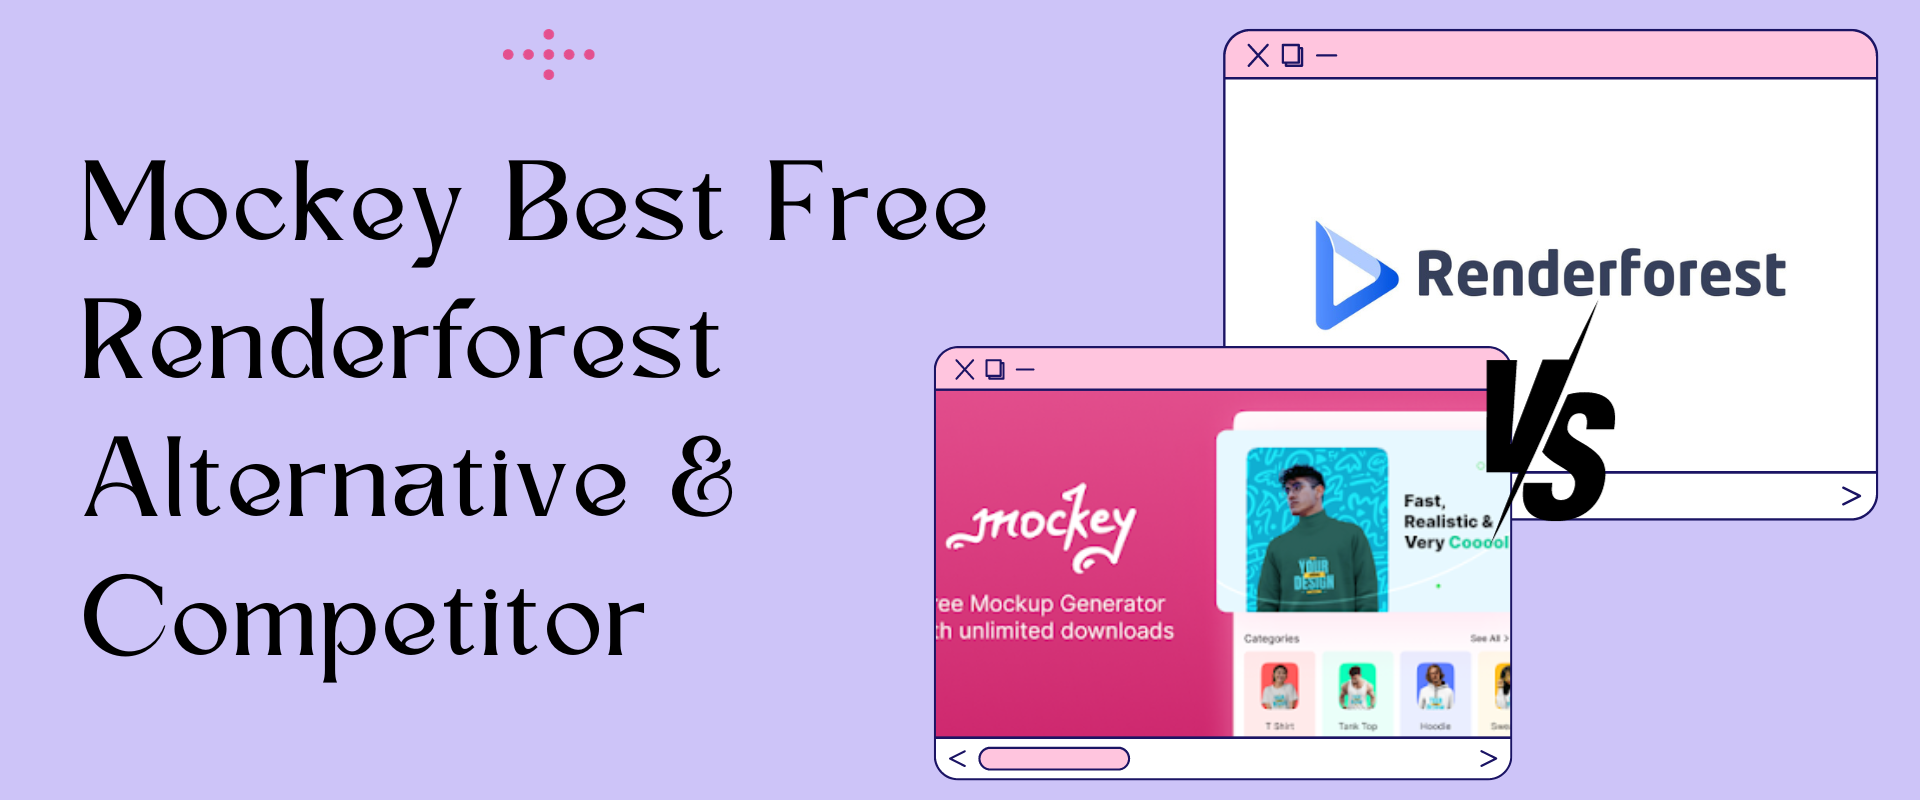 What Is the Best Free Renderforest Alternative & Competitor?